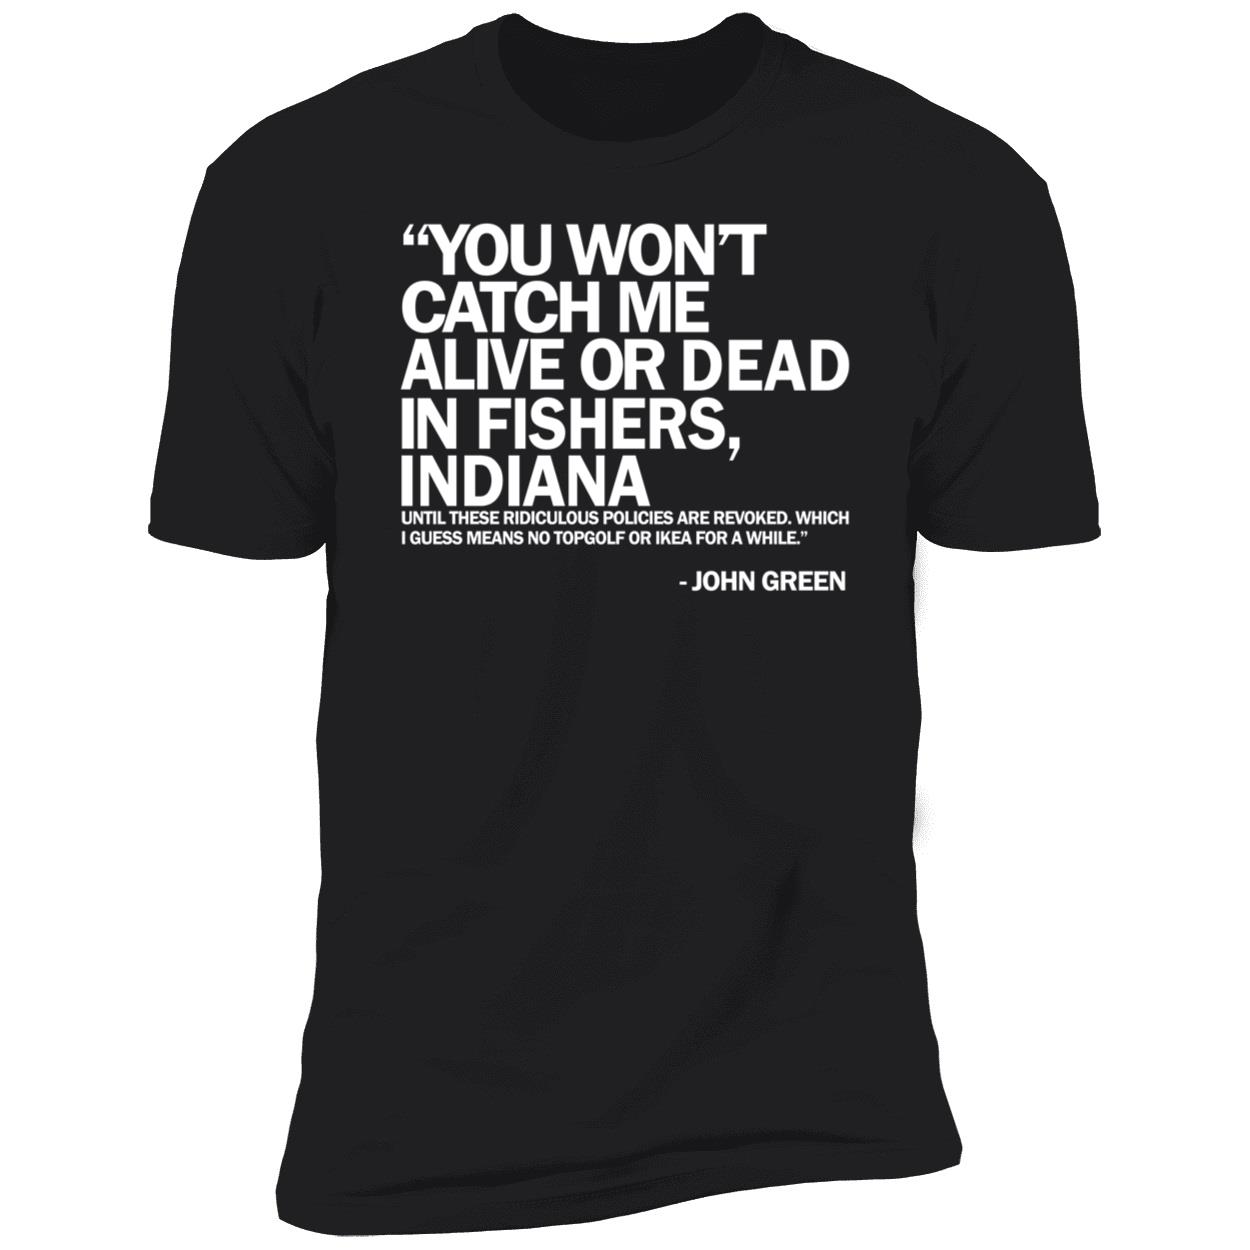 You Won’t Catch Me Alive Or Dead In Fishers, Indiana Premium SS T-Shirt